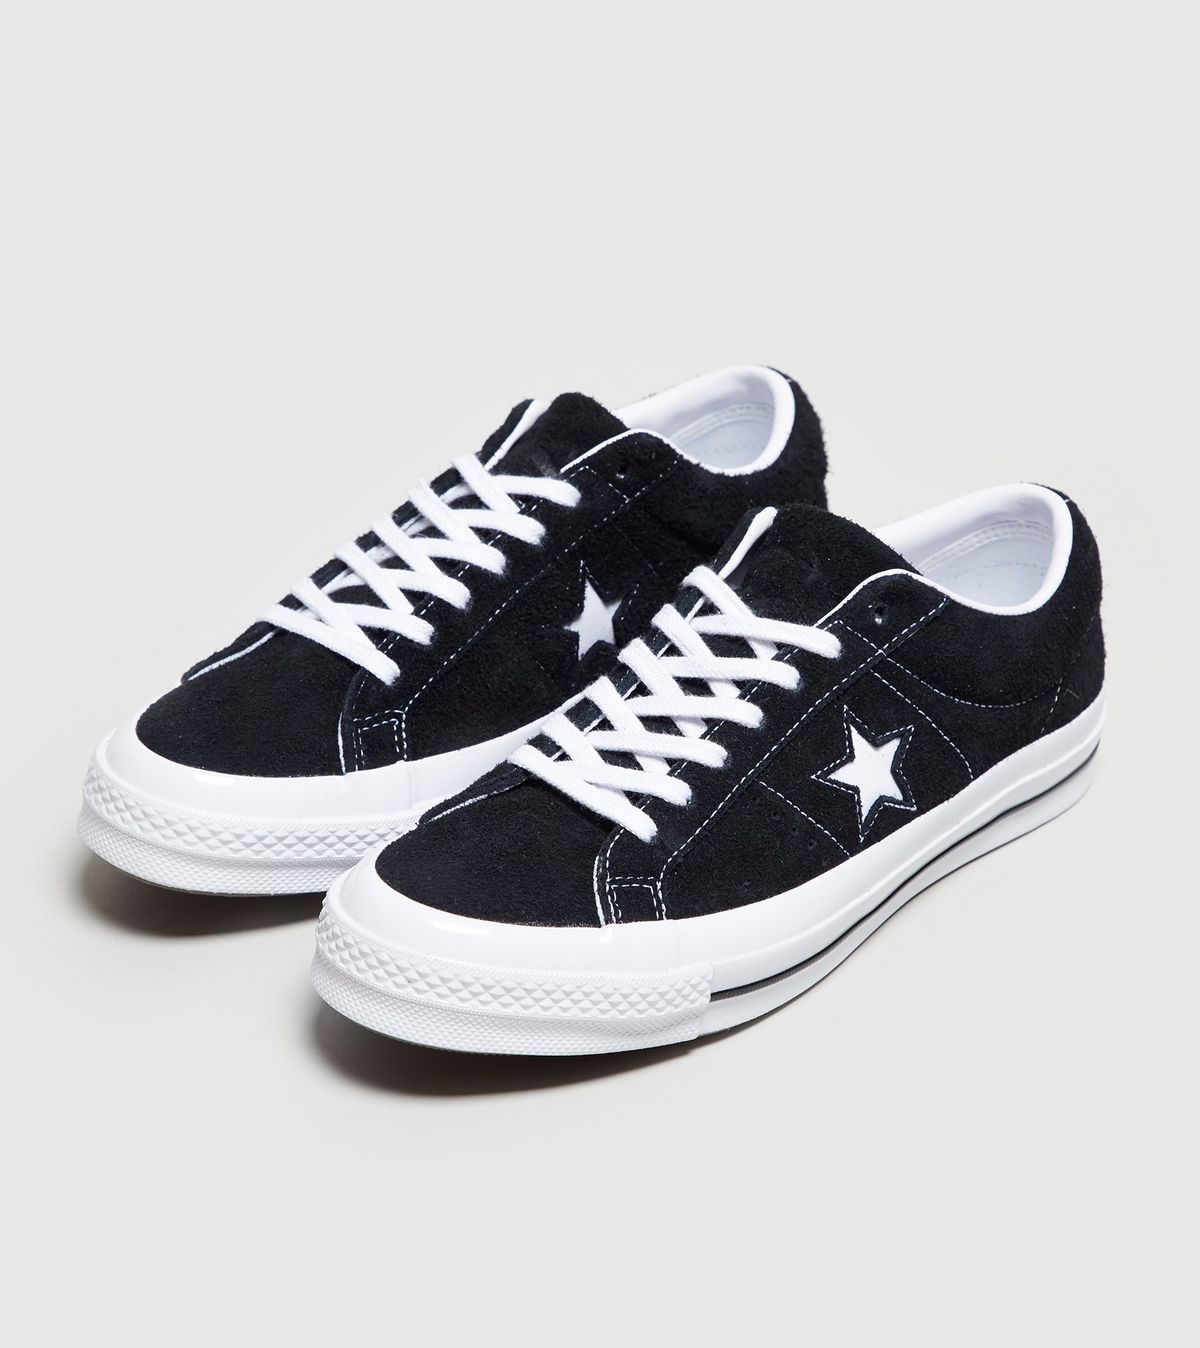 Converse One Star Black White Suede Men Unisex Casual Lifestyle Shoes  171587C | eBay